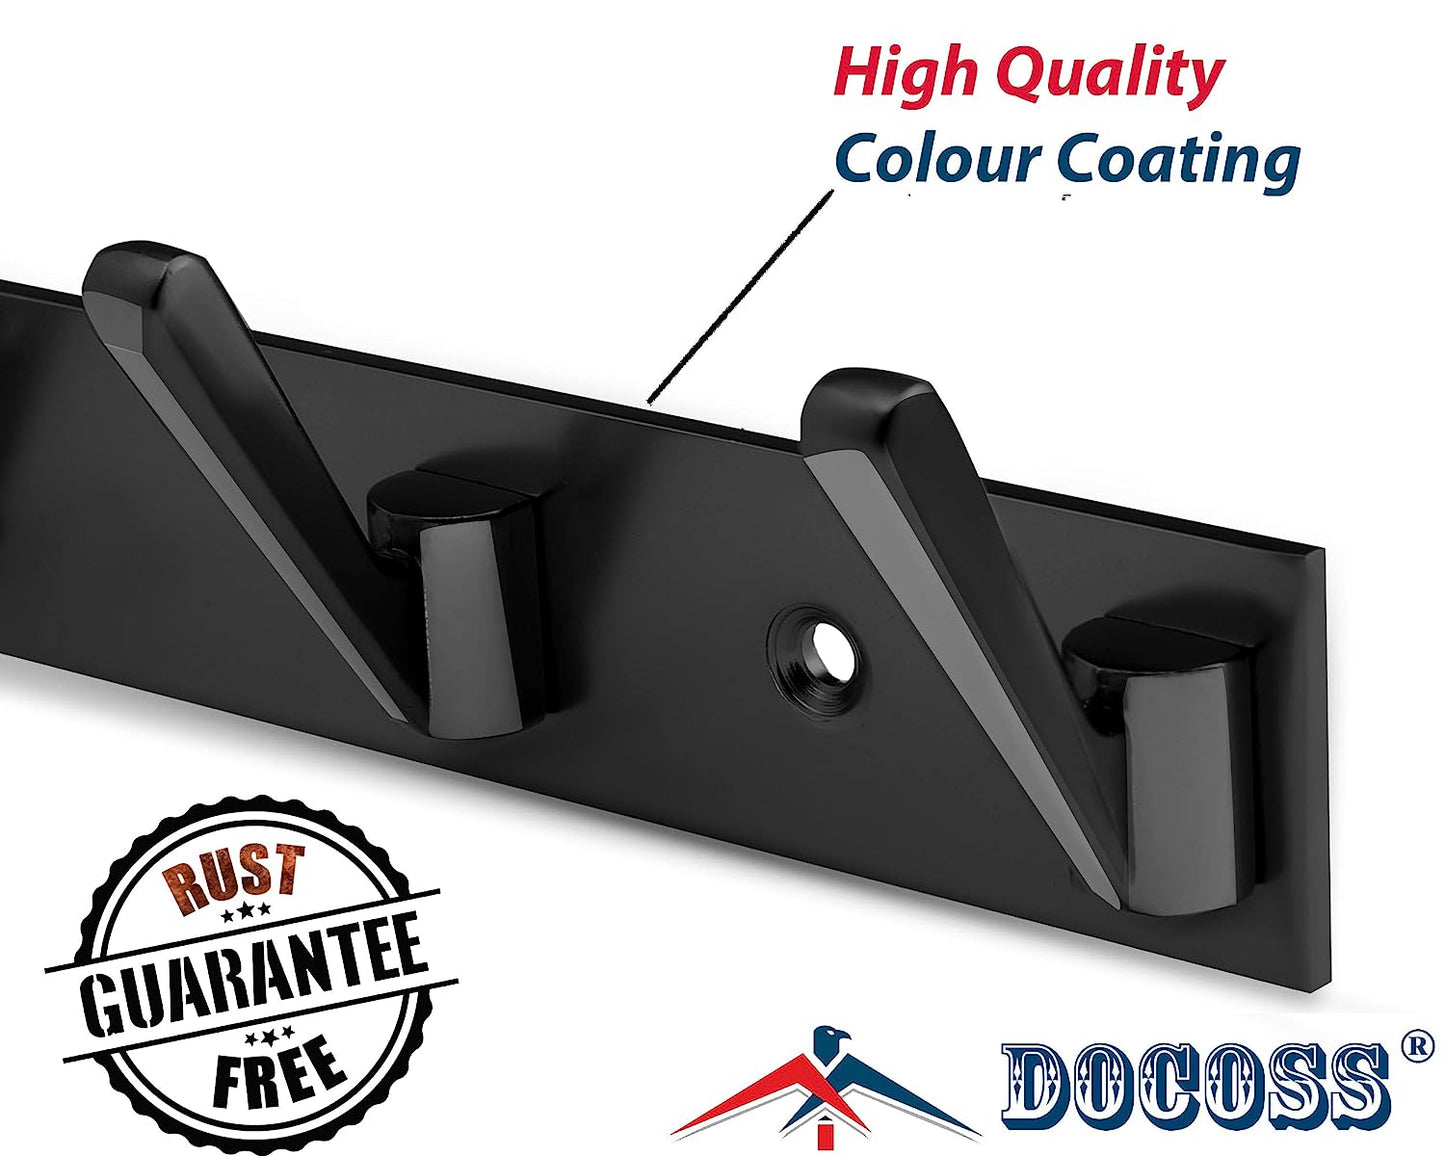 DOCOSS-Pack of 3-Deluxe Metal Black 5 Pin Cloth Hangers for Wall Door Cloth Hook Bathroom Wall Hooks Rail for Hanging Clothes,Towel Bathroom Accessories